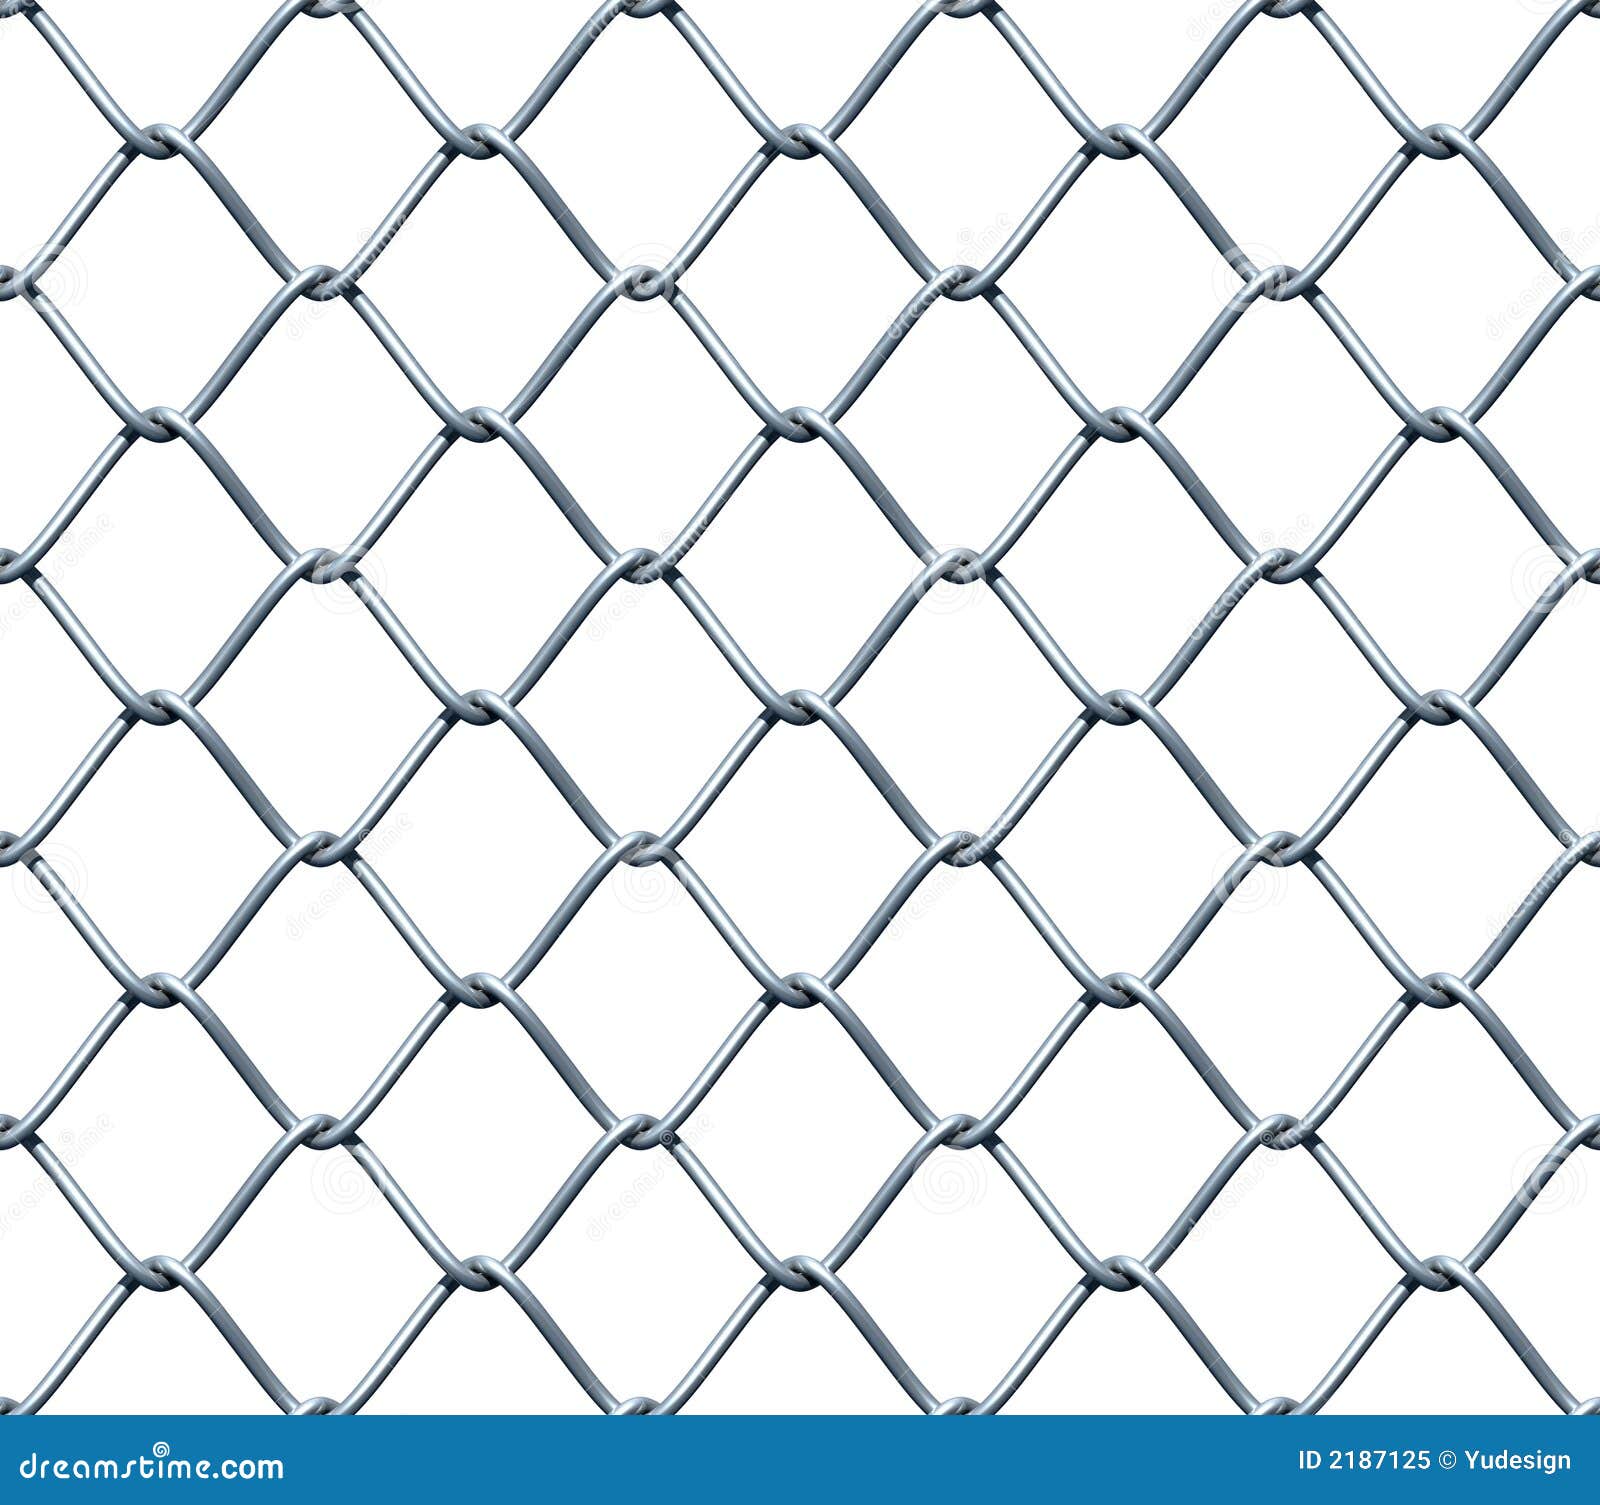 metal chain fence